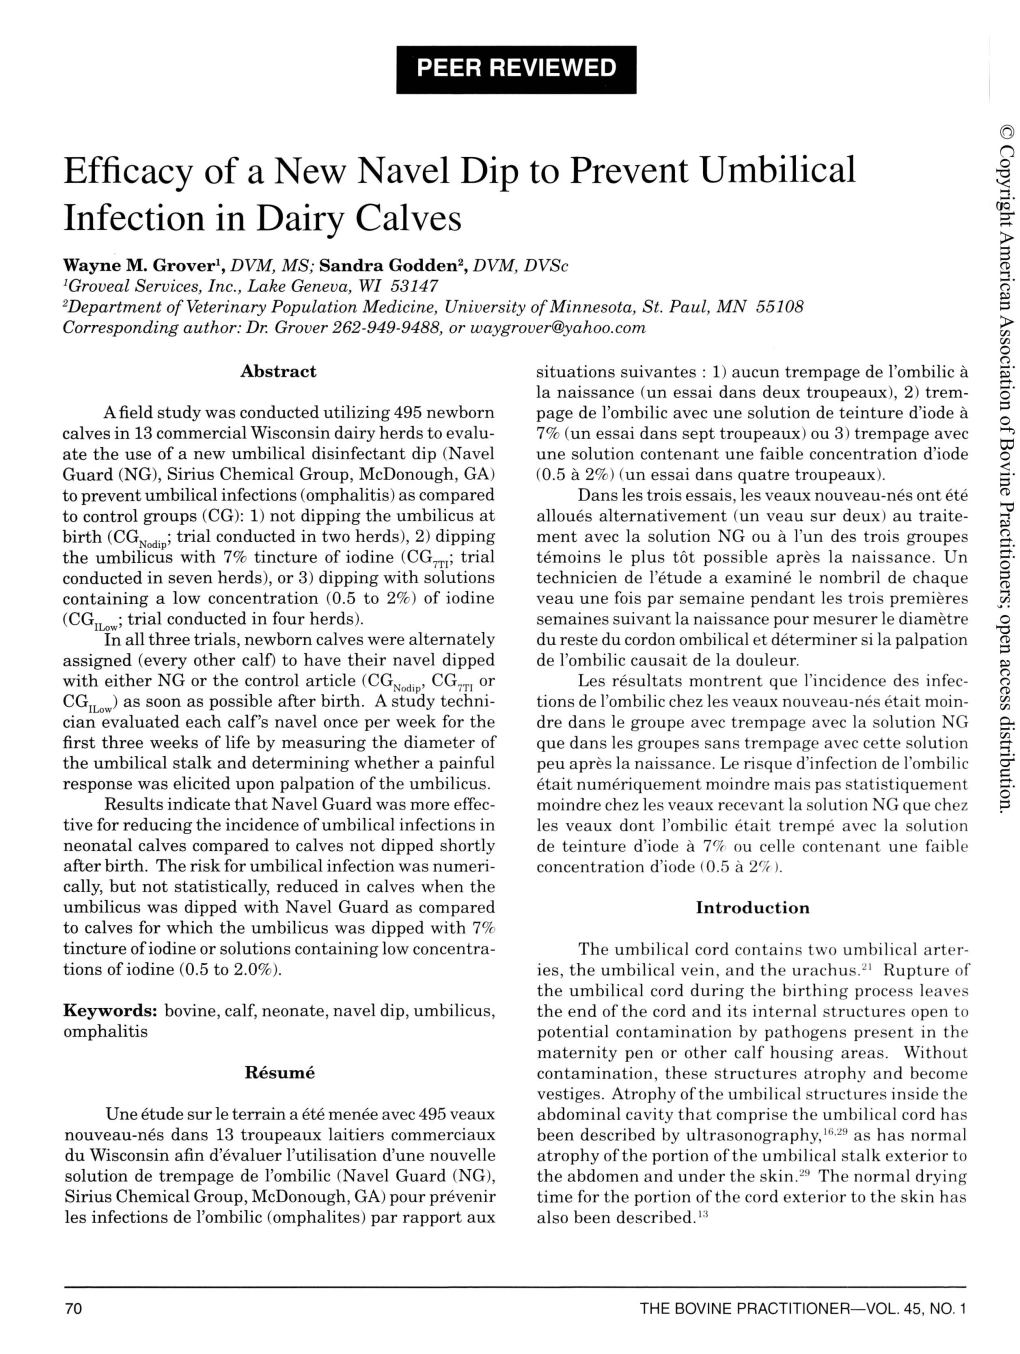 Efficacy of a New Navel Dip to Prevent Umbilical Infection in Dairy Calves